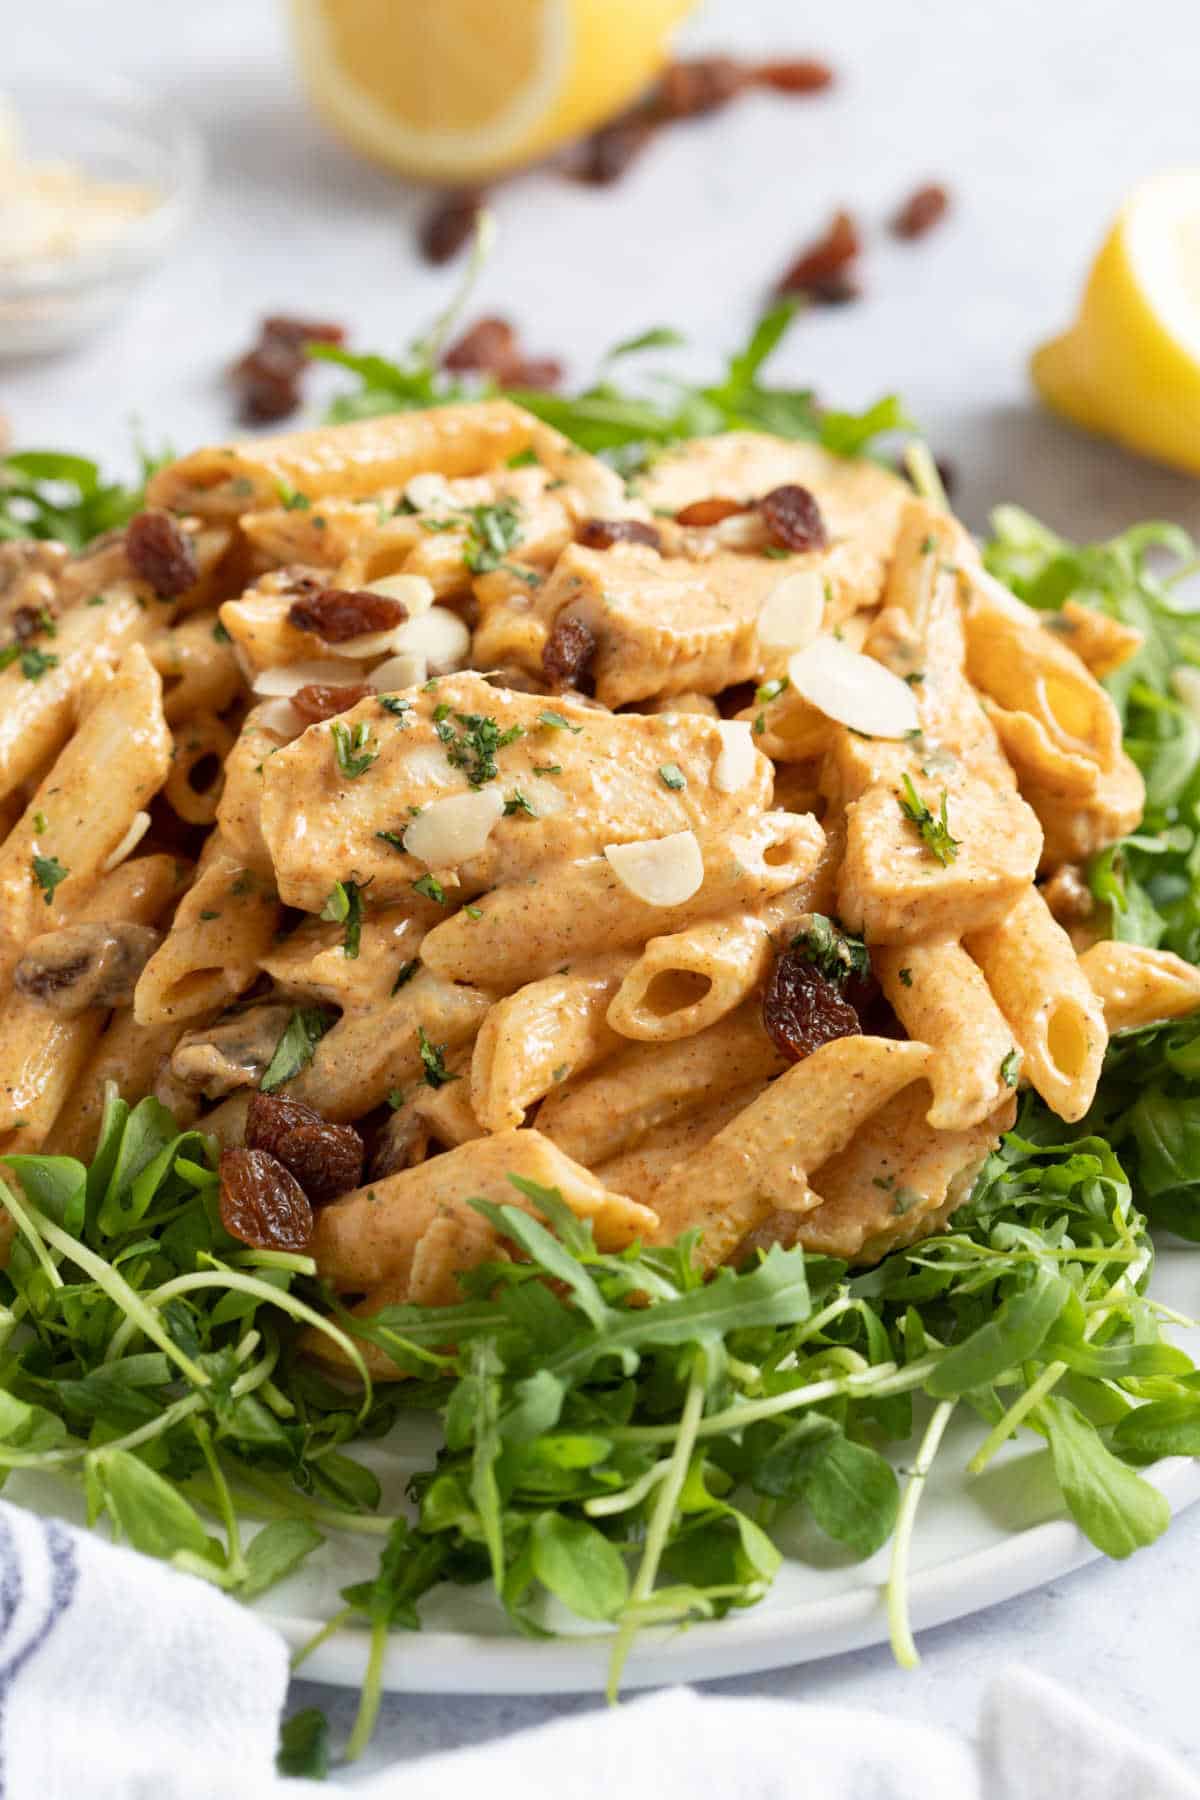 Coronation chicken pasta salad on a bed of rocket leaves.